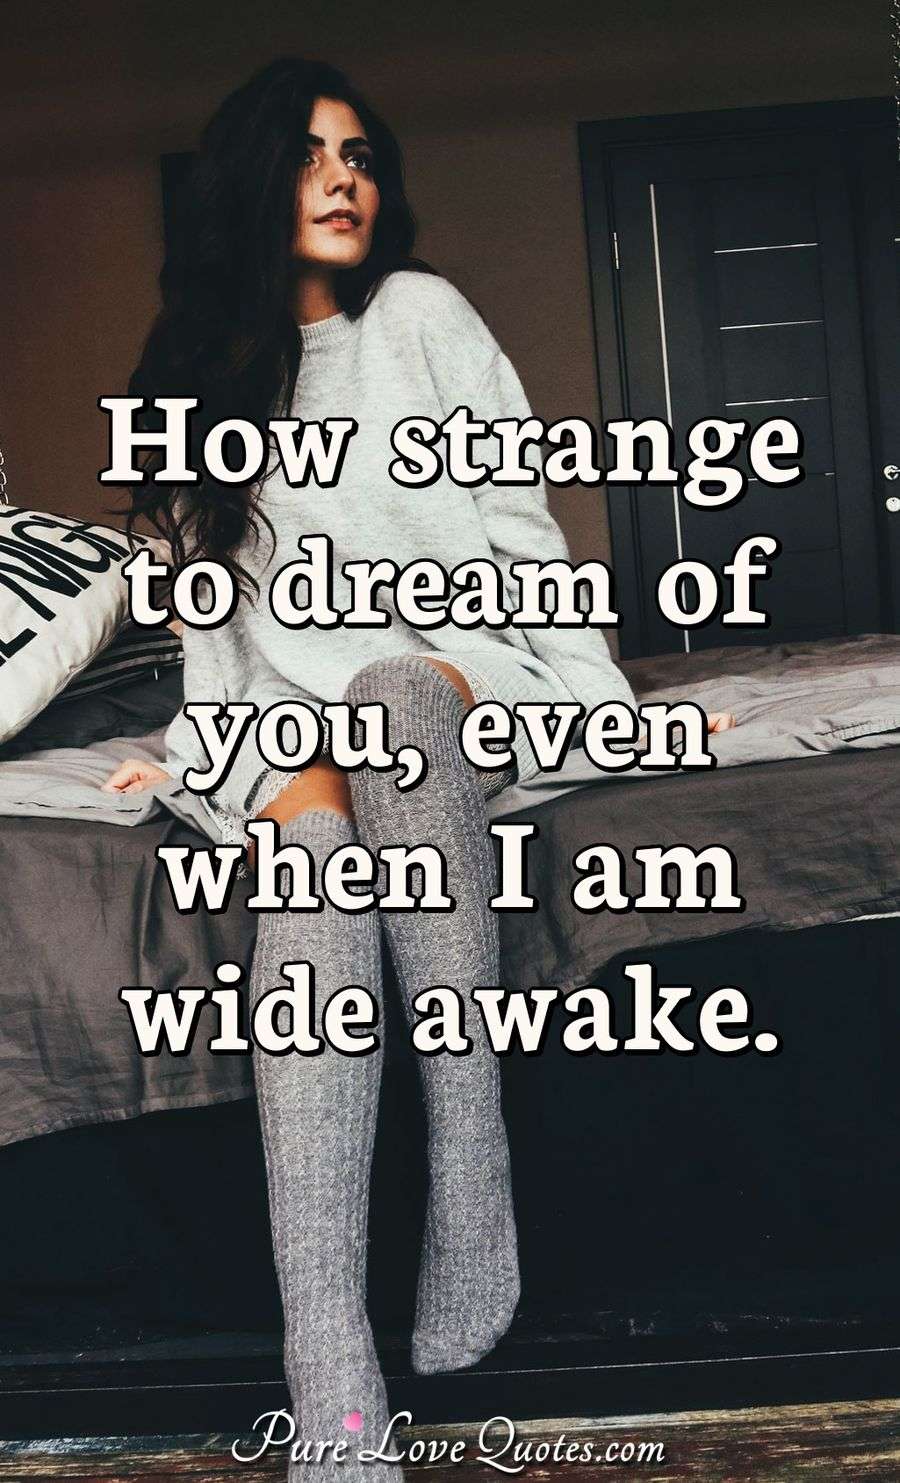 How strange to dream of you, even when I am wide awake. - Anonymous